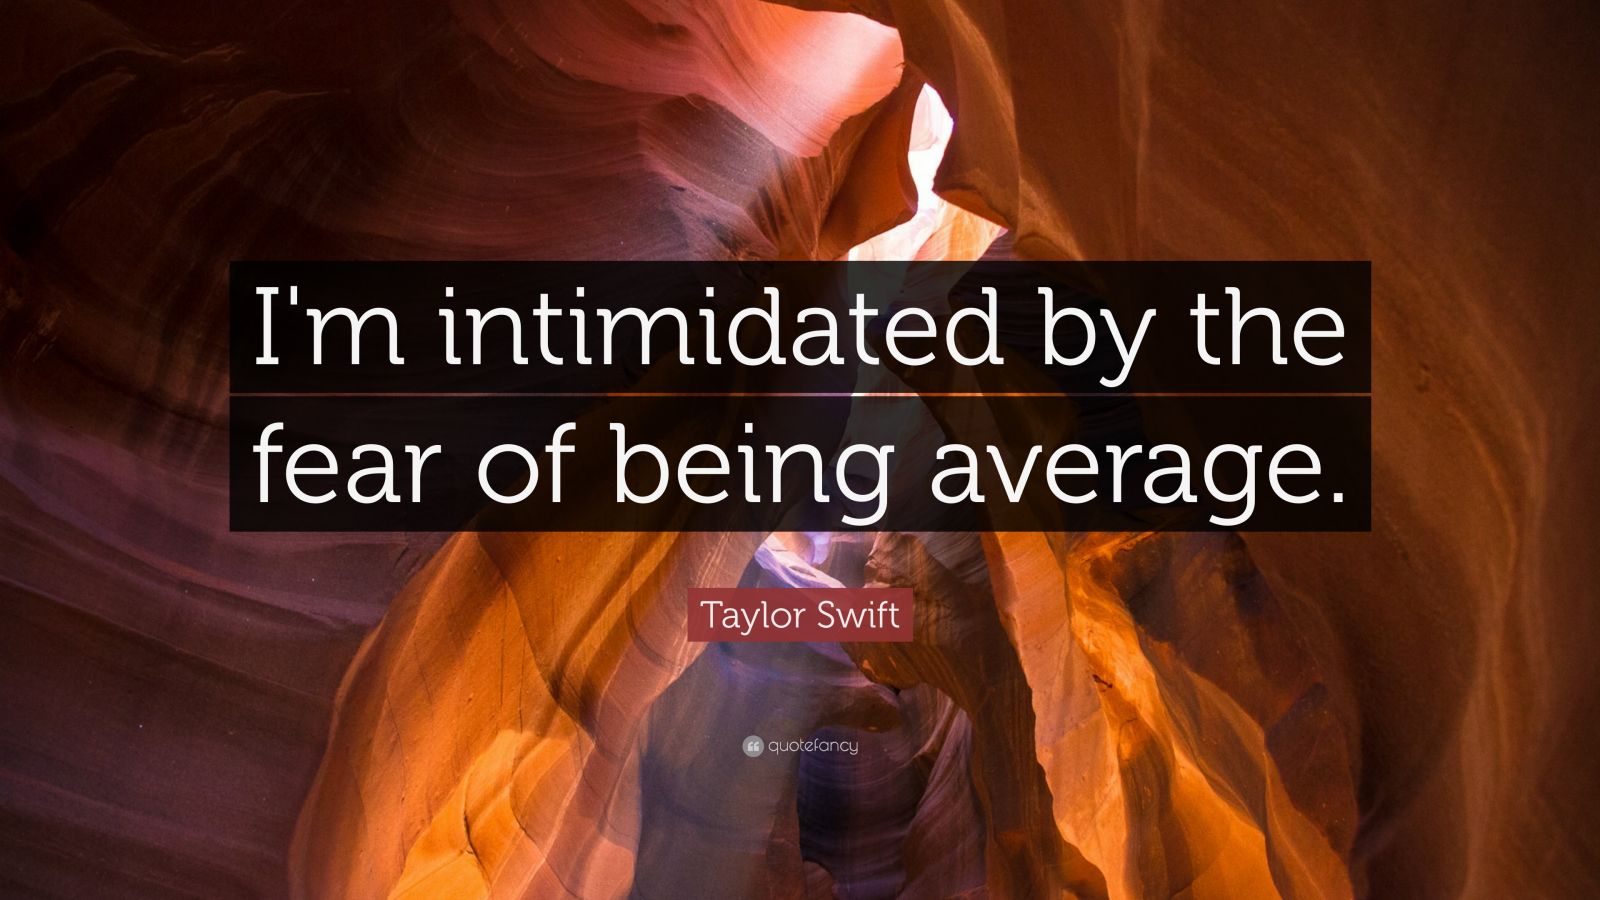 Taylor Swift Quote: “I'm intimidated by the fear of being average.” (15